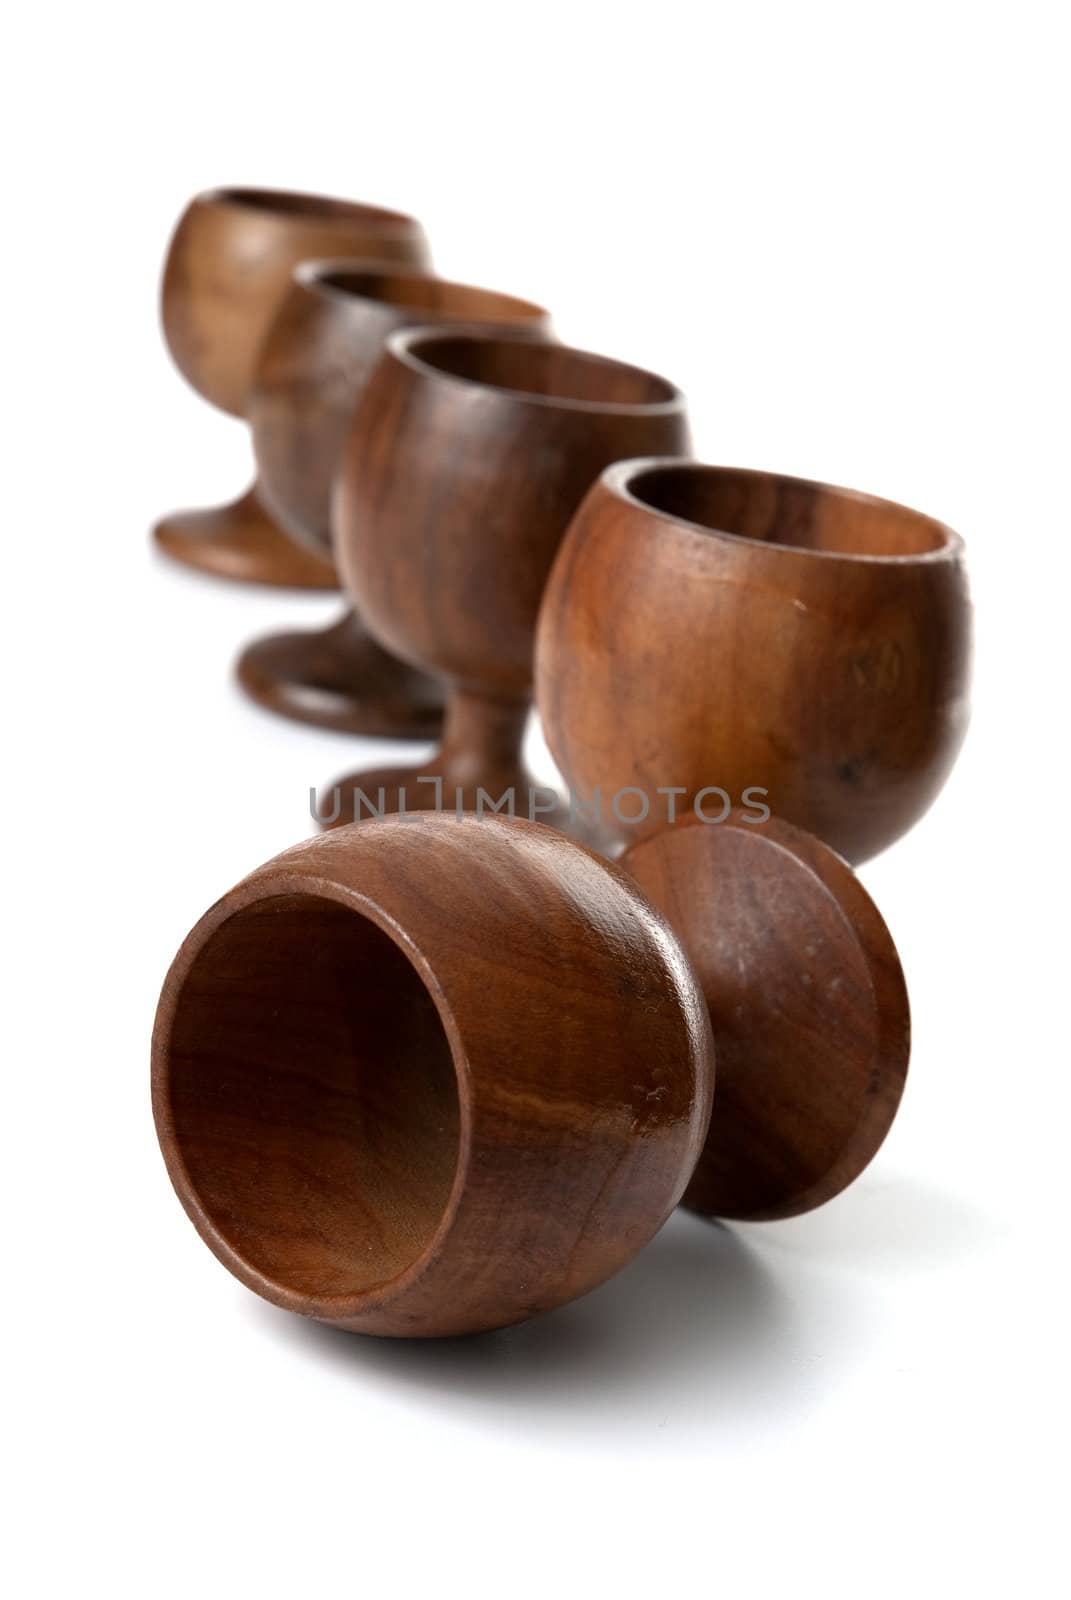 Wooden cups aligned isolated on white background.